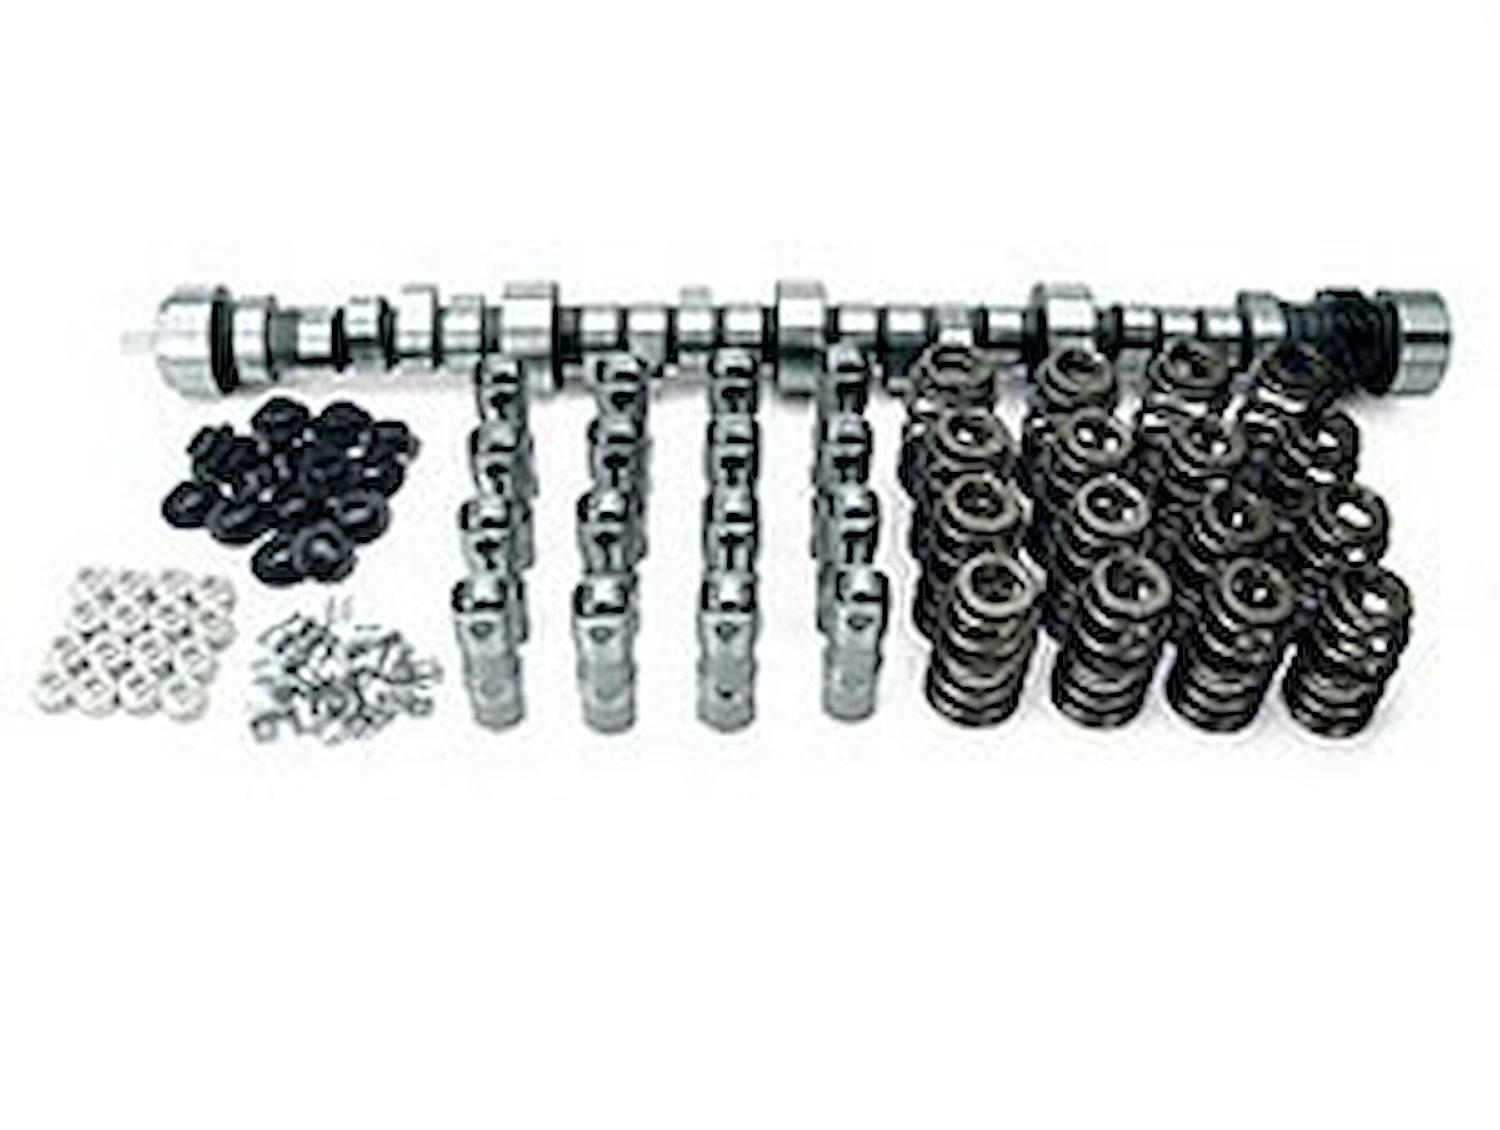 XFI Hydraulic Roller Camshaft Complete Kit Small Block Chevy 305/350 1987-95 Lift: .570"/.565" With 1.6 Rockers